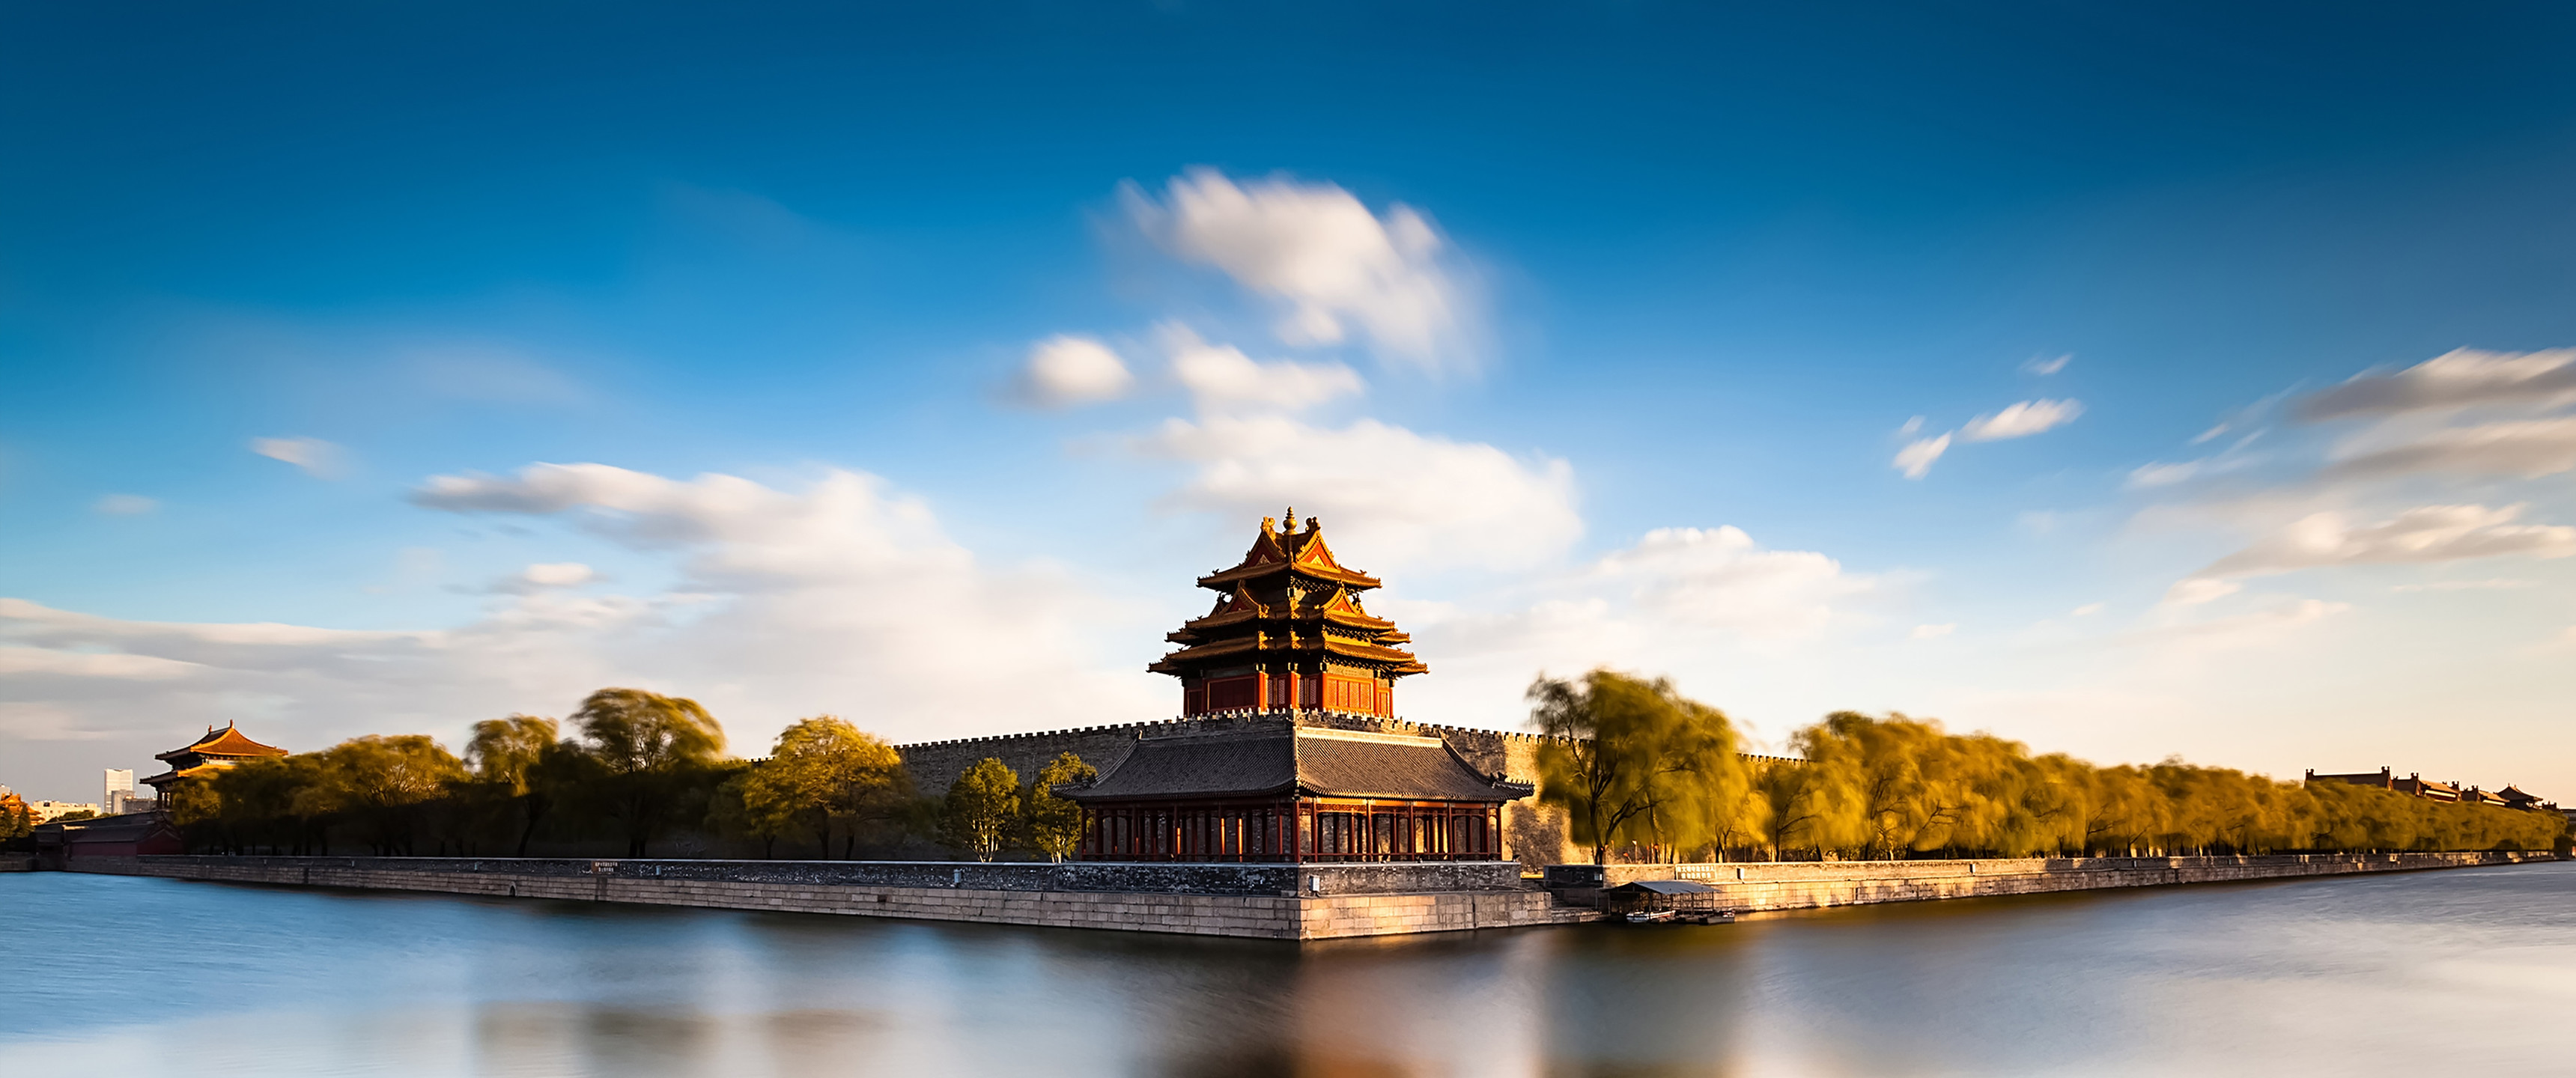 3440x1440 General  ultrawide China photography architecture 21 x 9